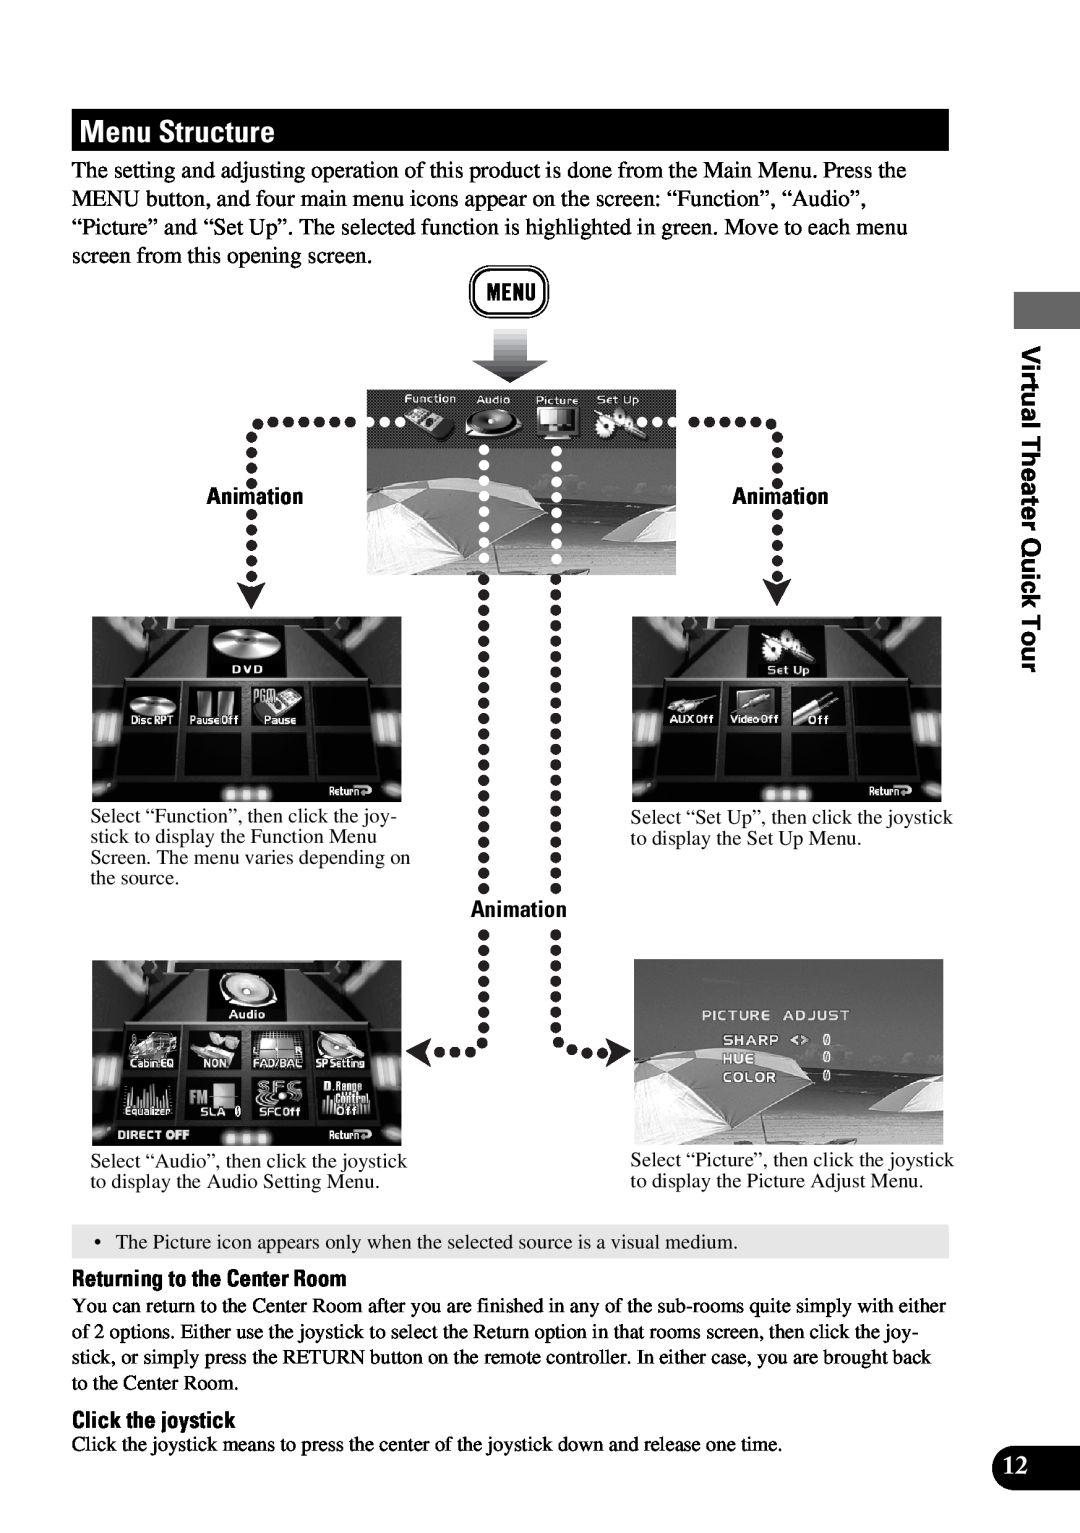 Pioneer AVM-P9000 owner manual Menu Structure, Animation, Returning to the Center Room, Click the joystick 